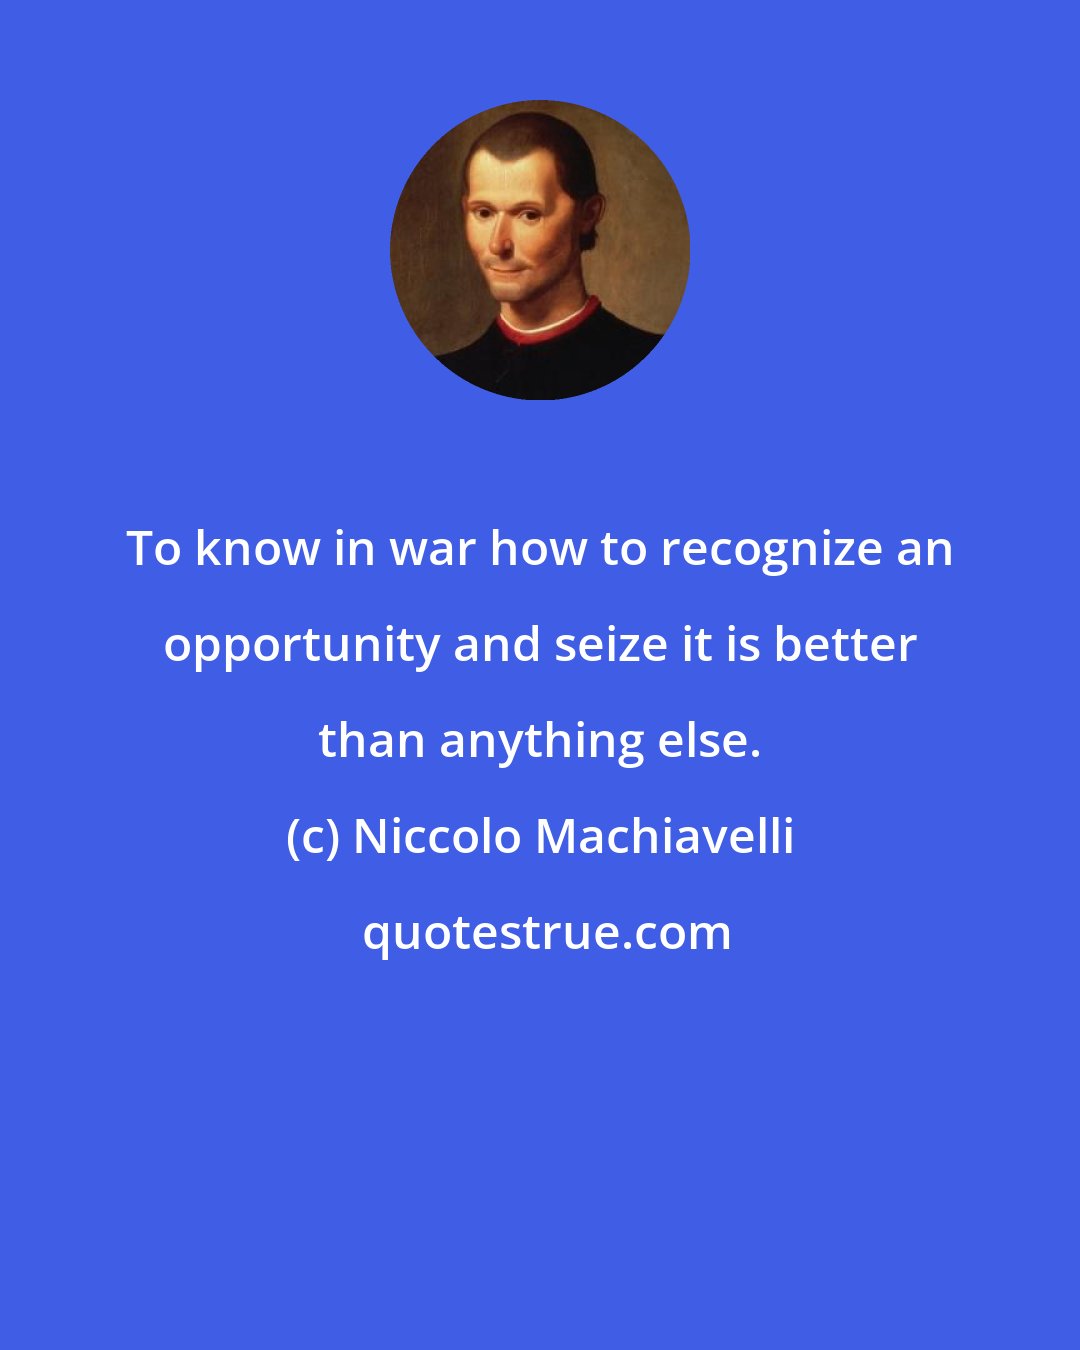 Niccolo Machiavelli: To know in war how to recognize an opportunity and seize it is better than anything else.